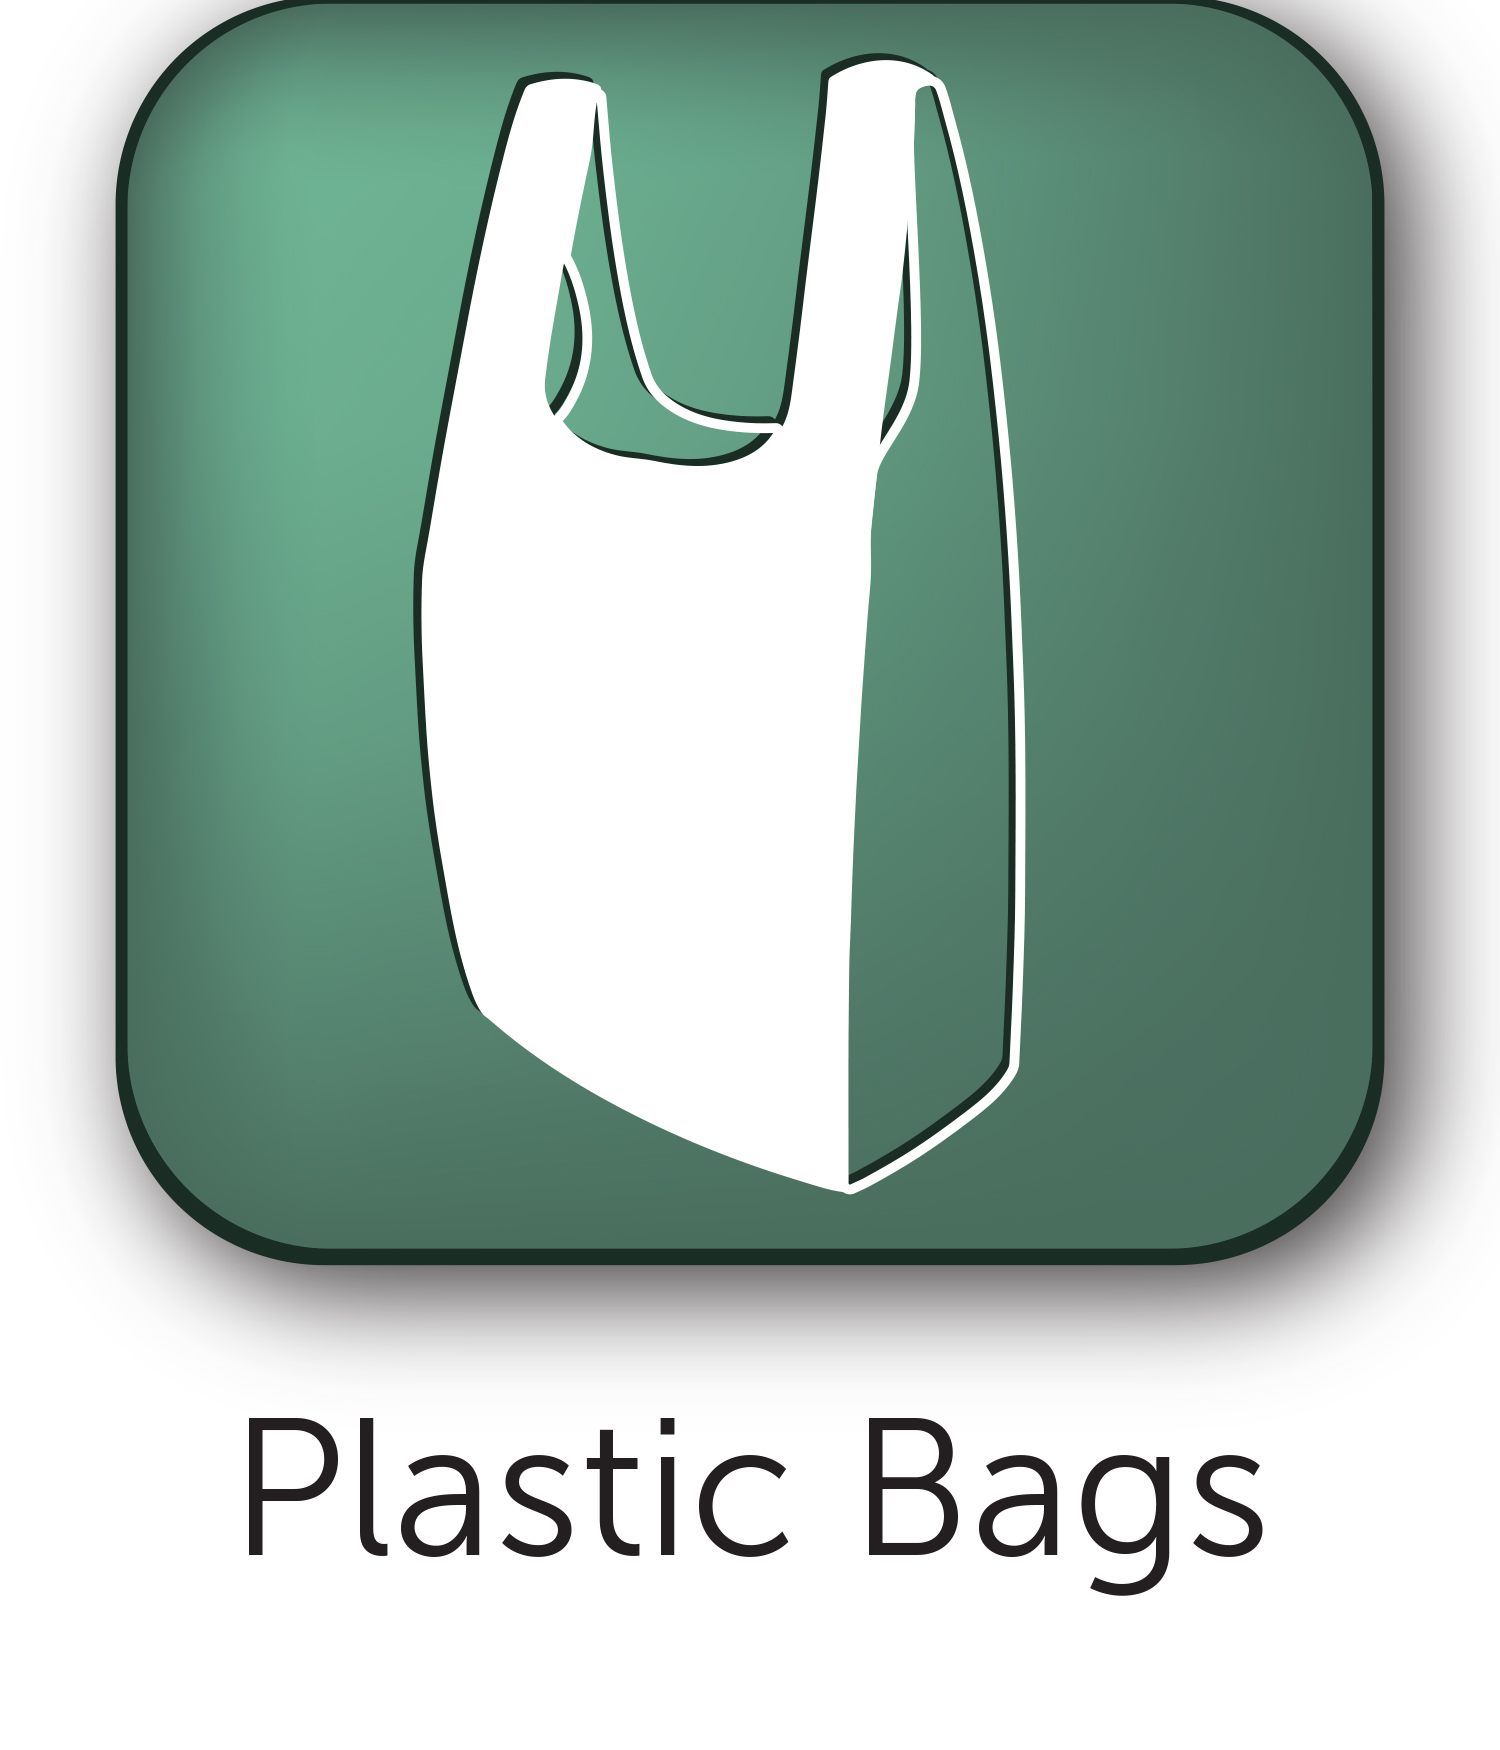 PlasticBags.png